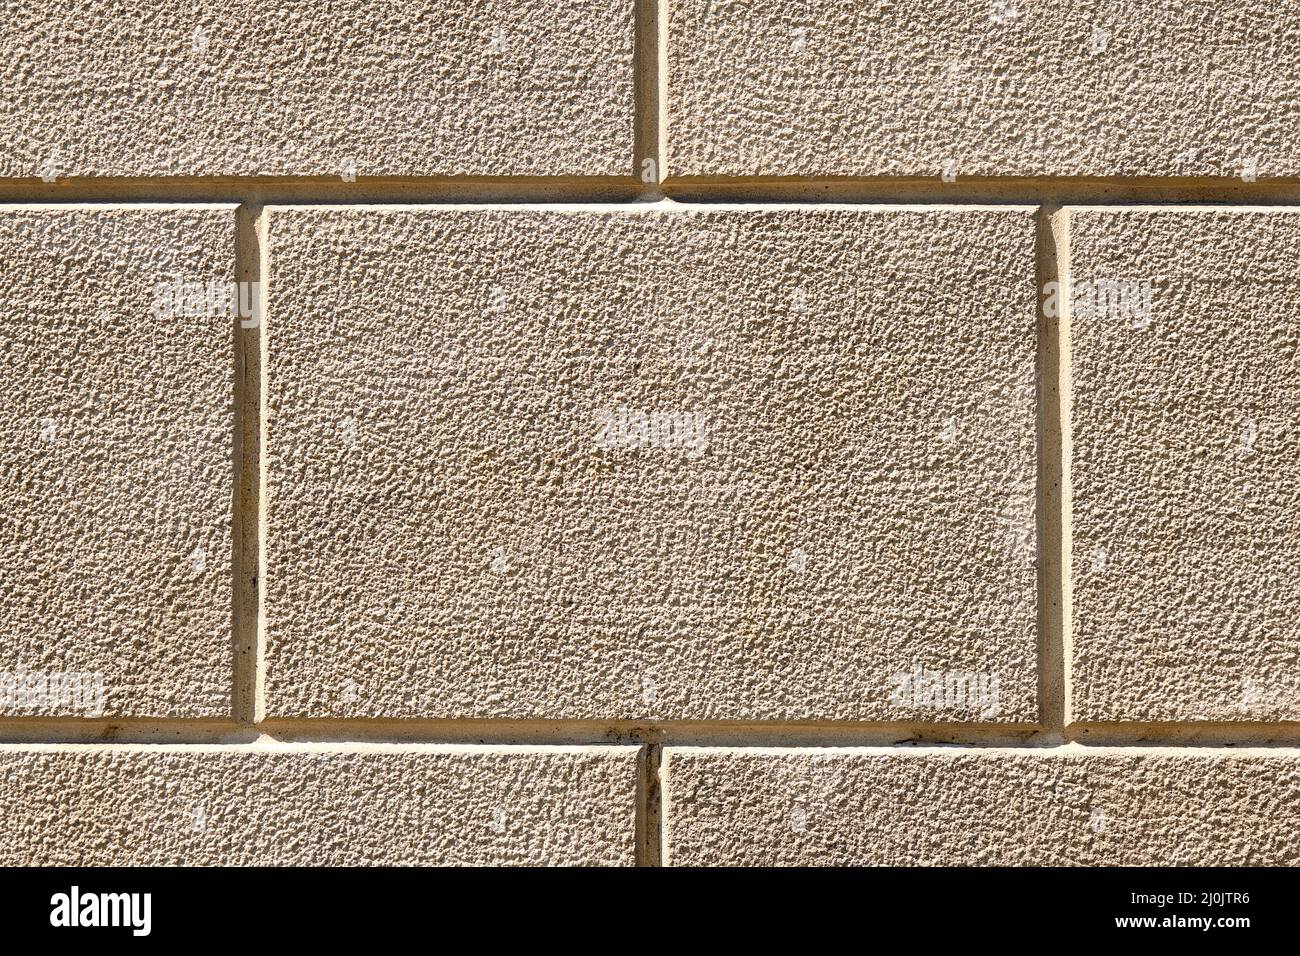 Background from a wall with rectangular beige stone slabs Stock Photo